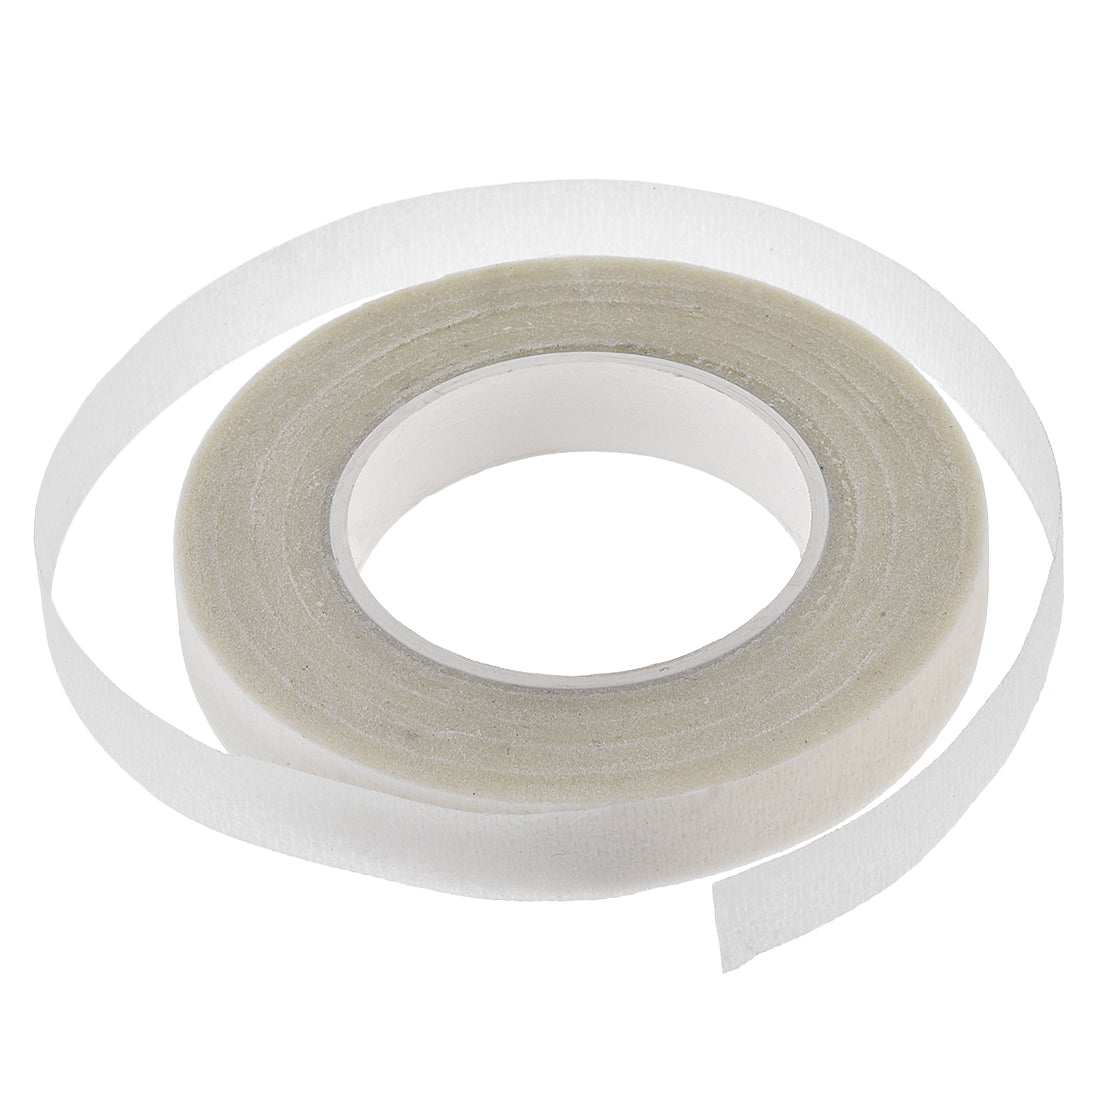 uxcell Uxcell 4Roll 1/2"x30Yard White Floral Tape Flower Adhesives Floral Arrangement Kit